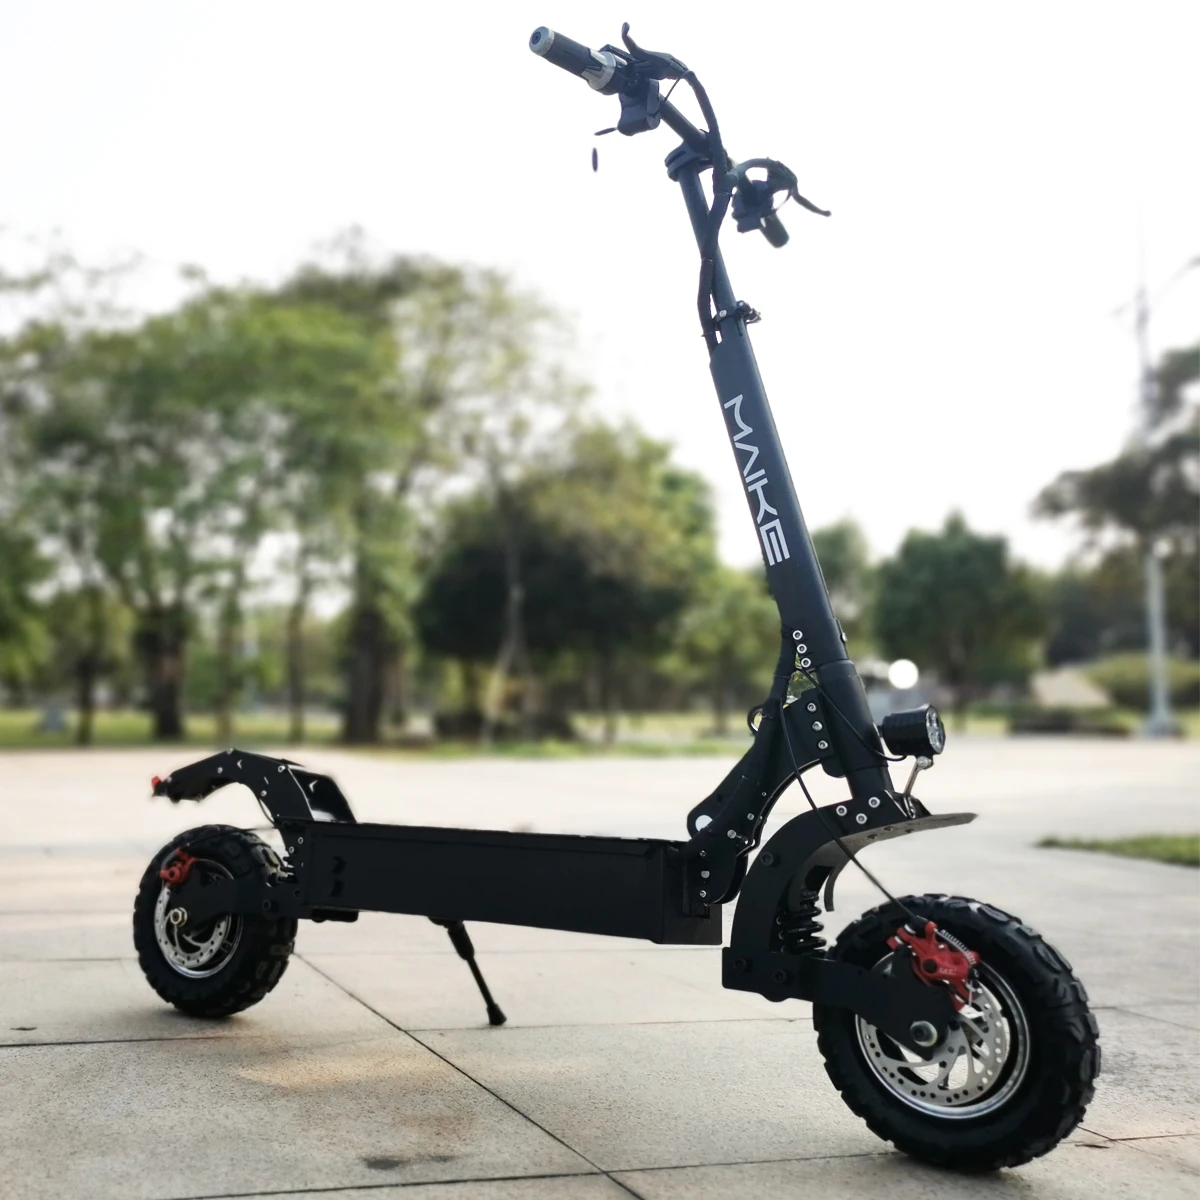 

Factory Hot Sale Maike mk4 scooter wide wheel 11 inch 1200w motor scooter high speed fast off road electric kick scooters